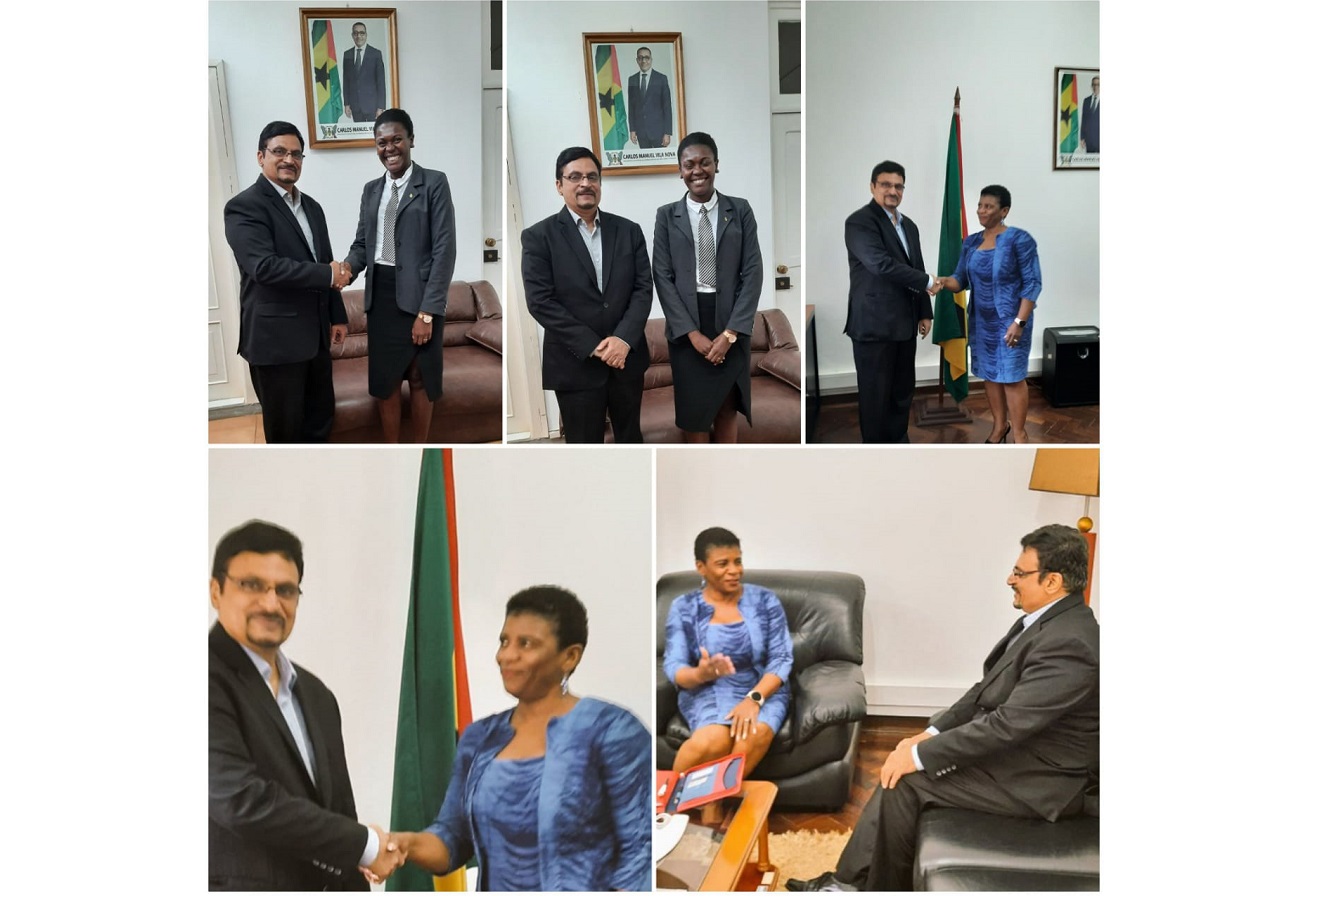 Ambassador meets the Minister for Youth Affairs and Sports and Minister for Justice and Public Administration